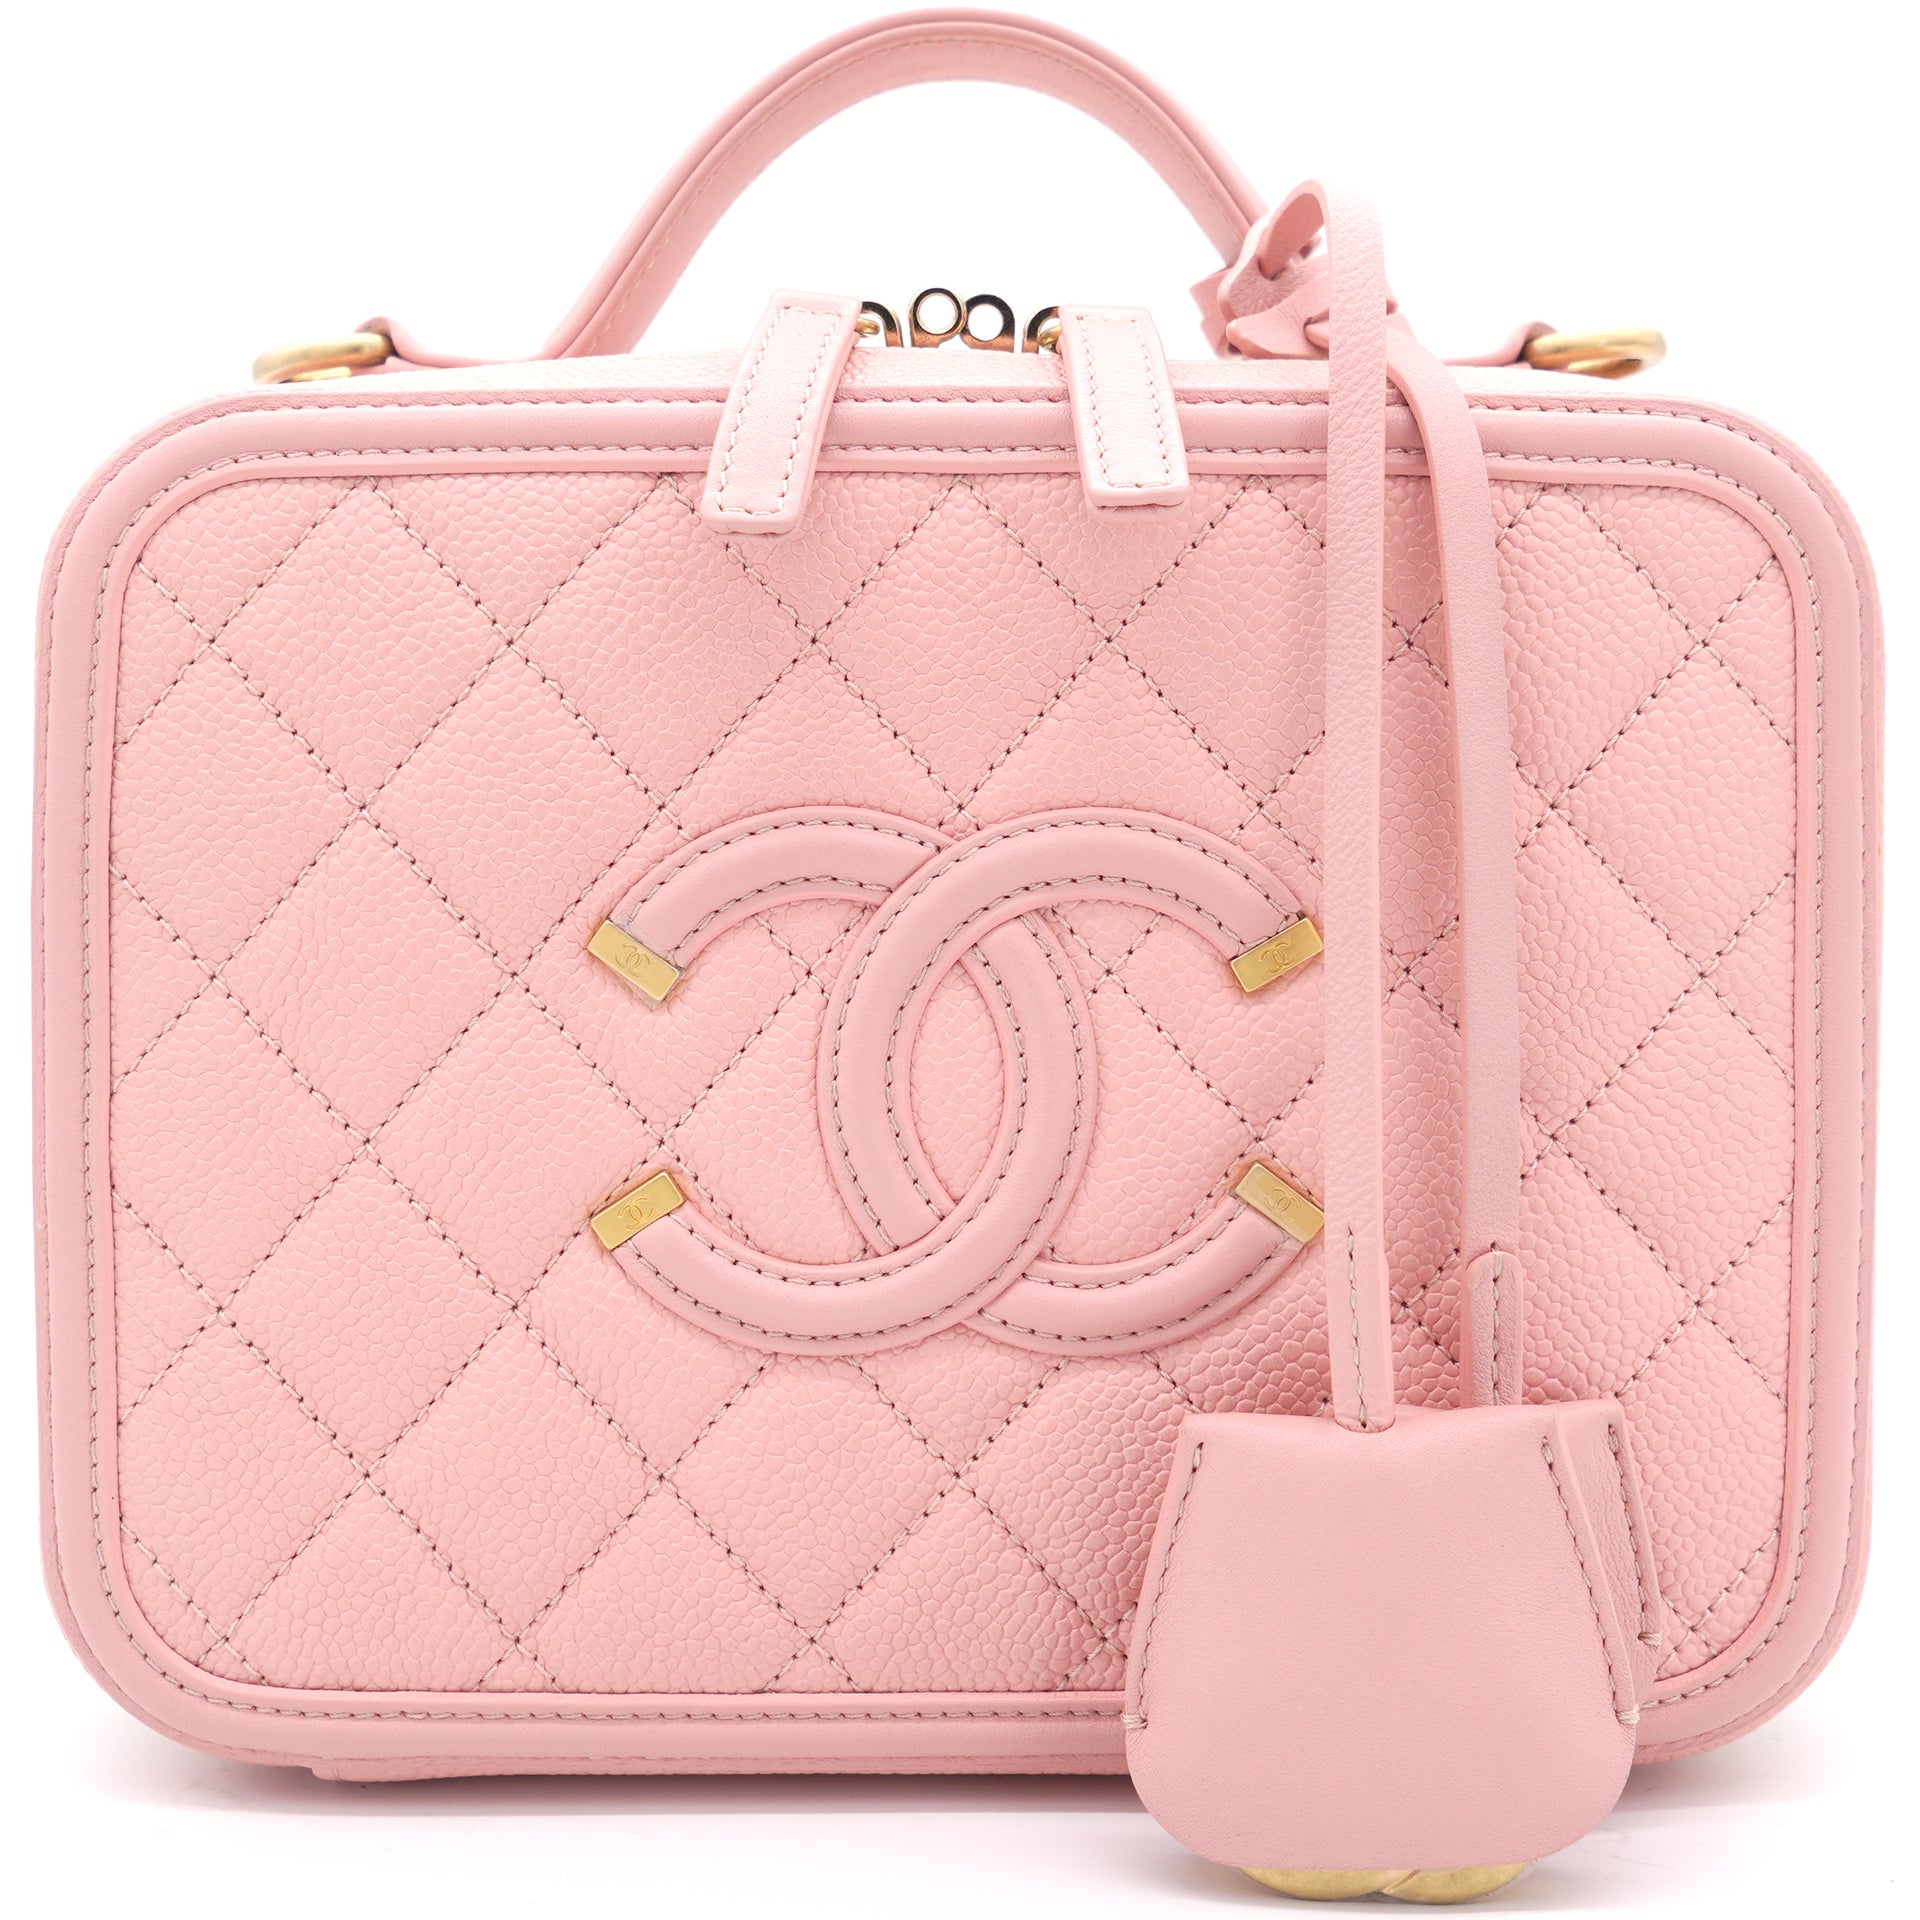 Chanel Light Pink Quilted Lambskin Small Trendy Cc Vanity Case